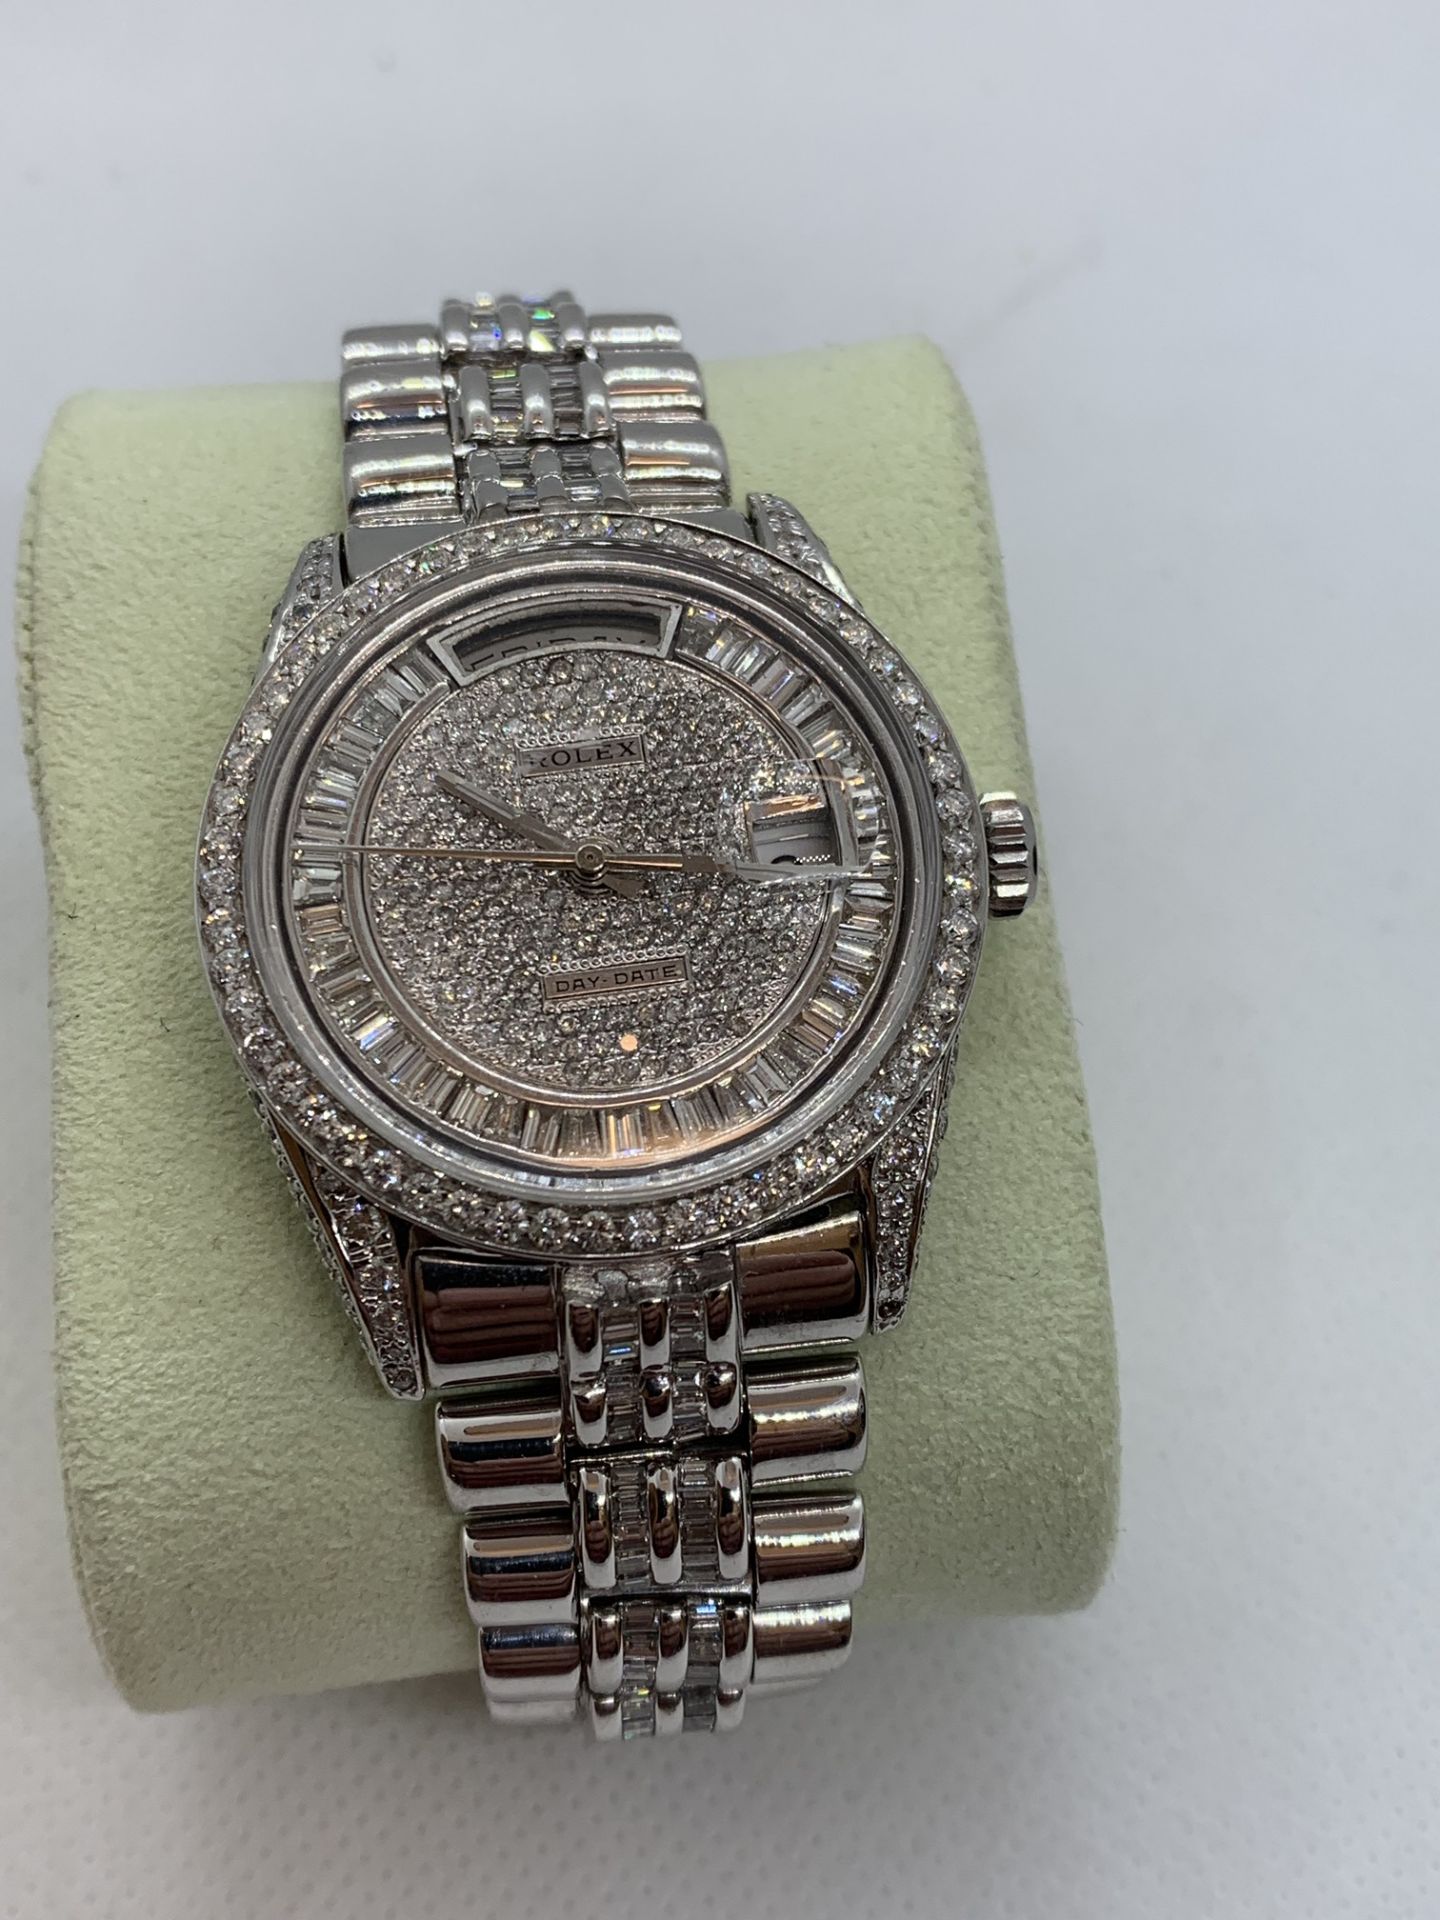 Diamond Encrusted Mens 36mm Day-Date, Solid White Gold - Diamond/ “Super President” Marked ROLEX - Image 4 of 18